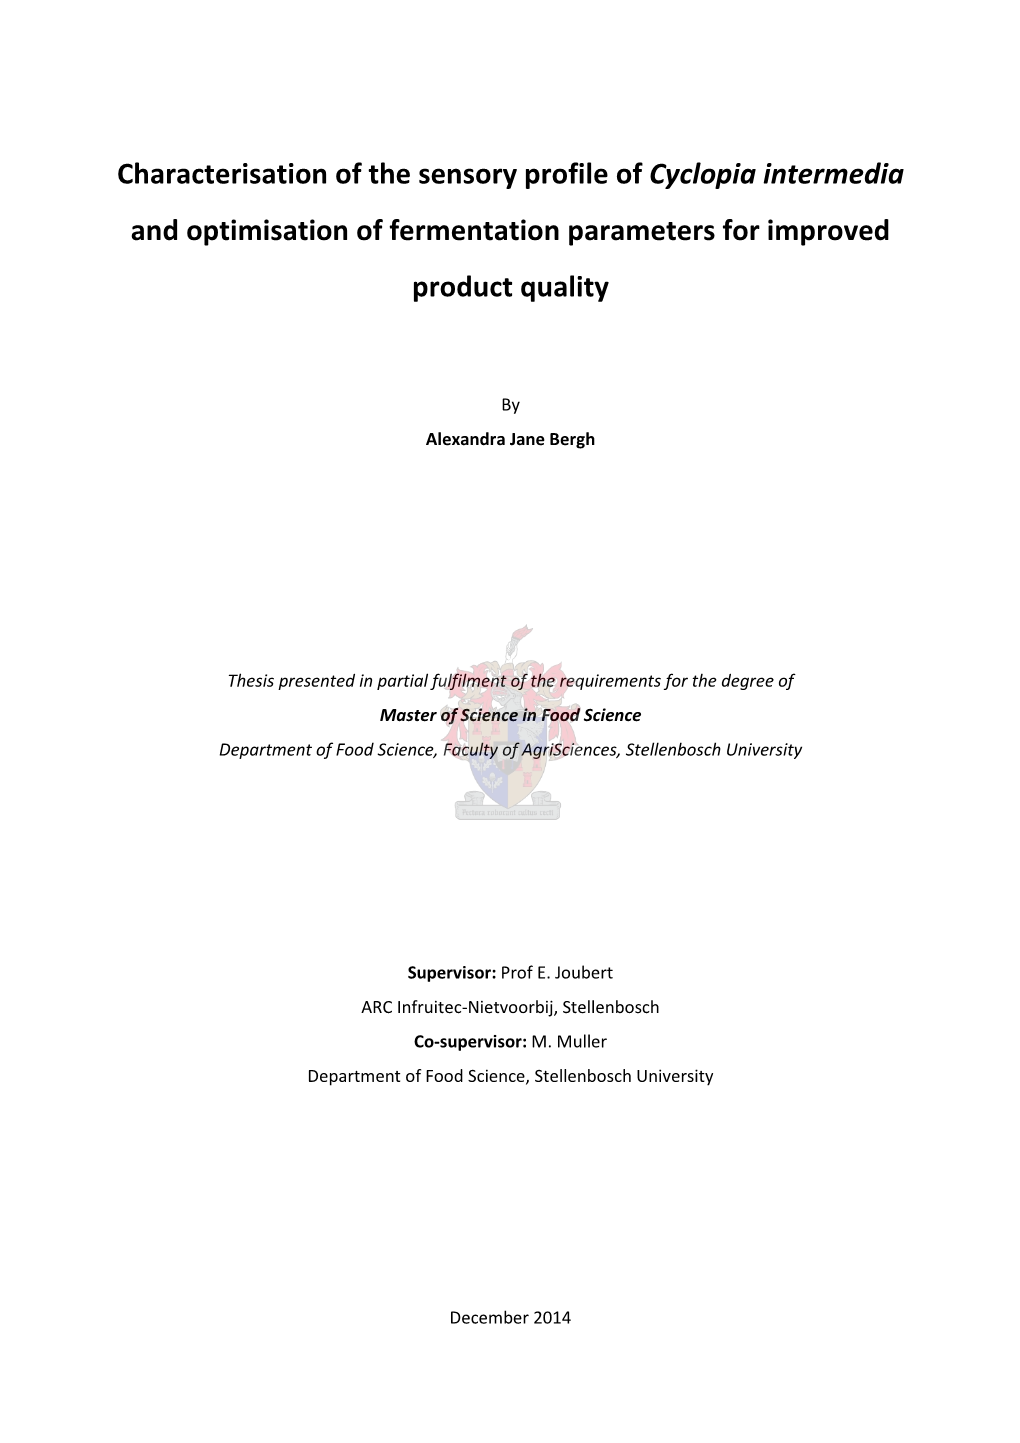 Characterisation of the Sensory Profile of Cyclopia Intermedia and Optimisation of Fermentation Parameters for Improved Product Quality